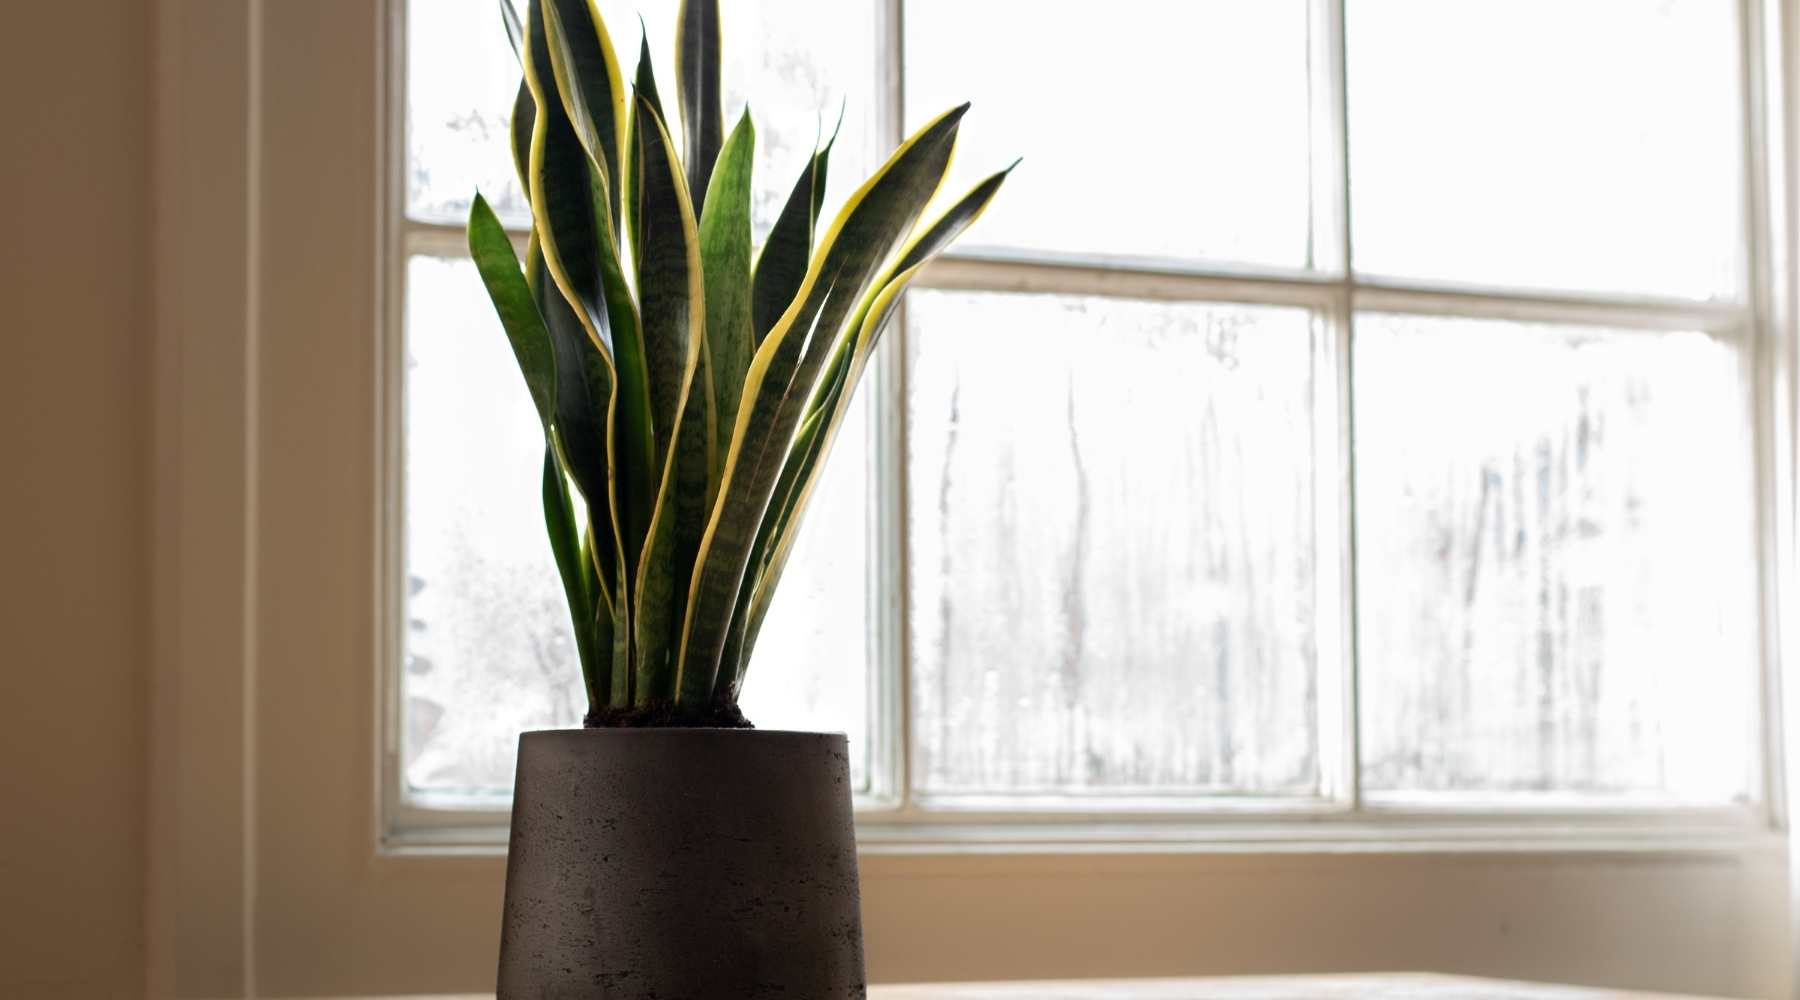 How To Care For a Snake Plant?